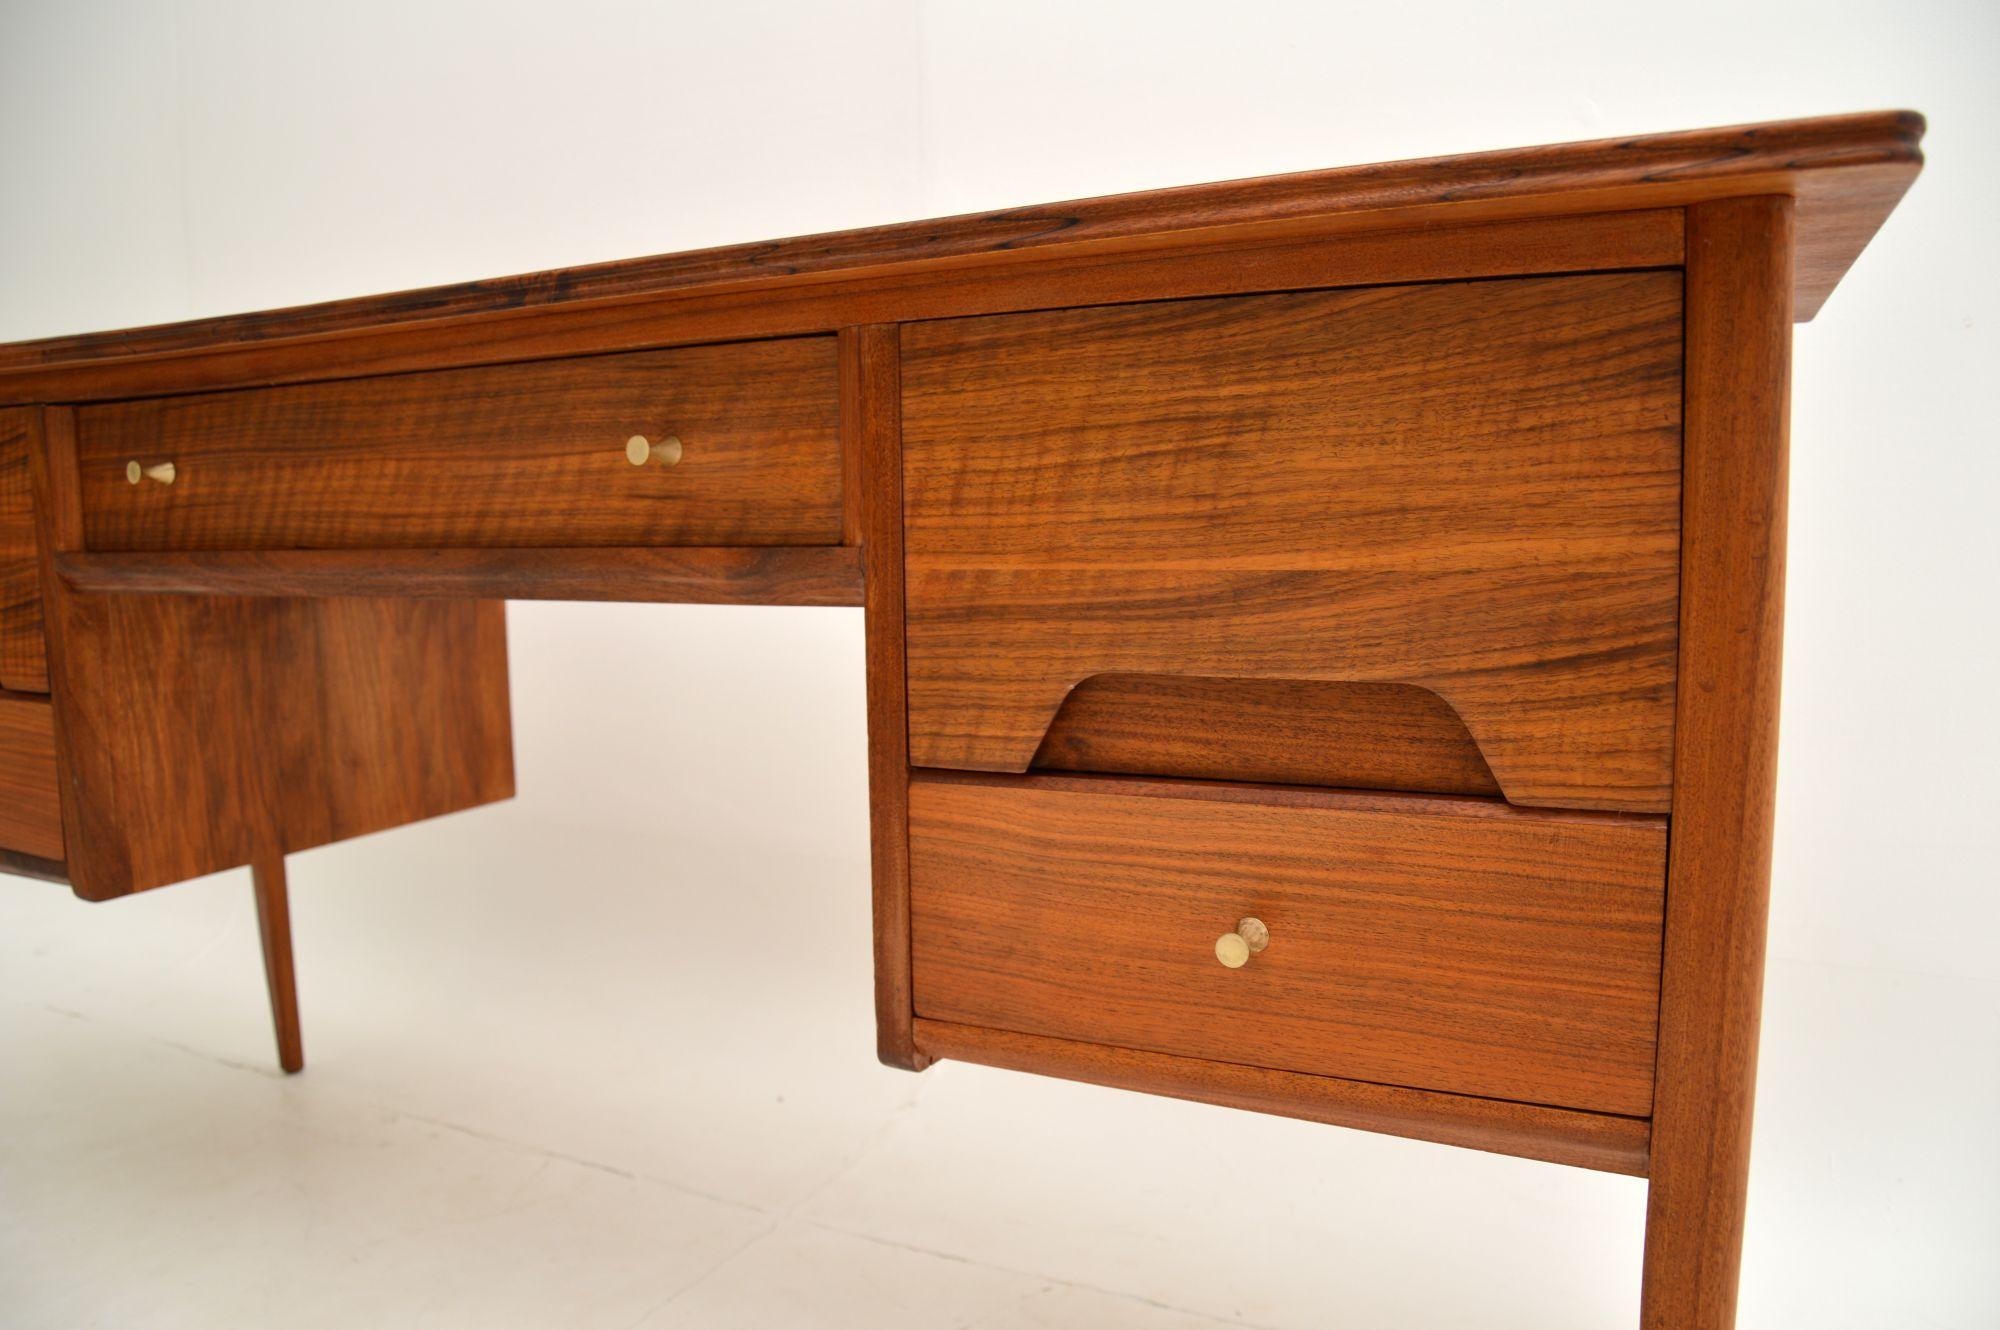 English Vintage Walnut Desk by A. Younger, c. 1960’s